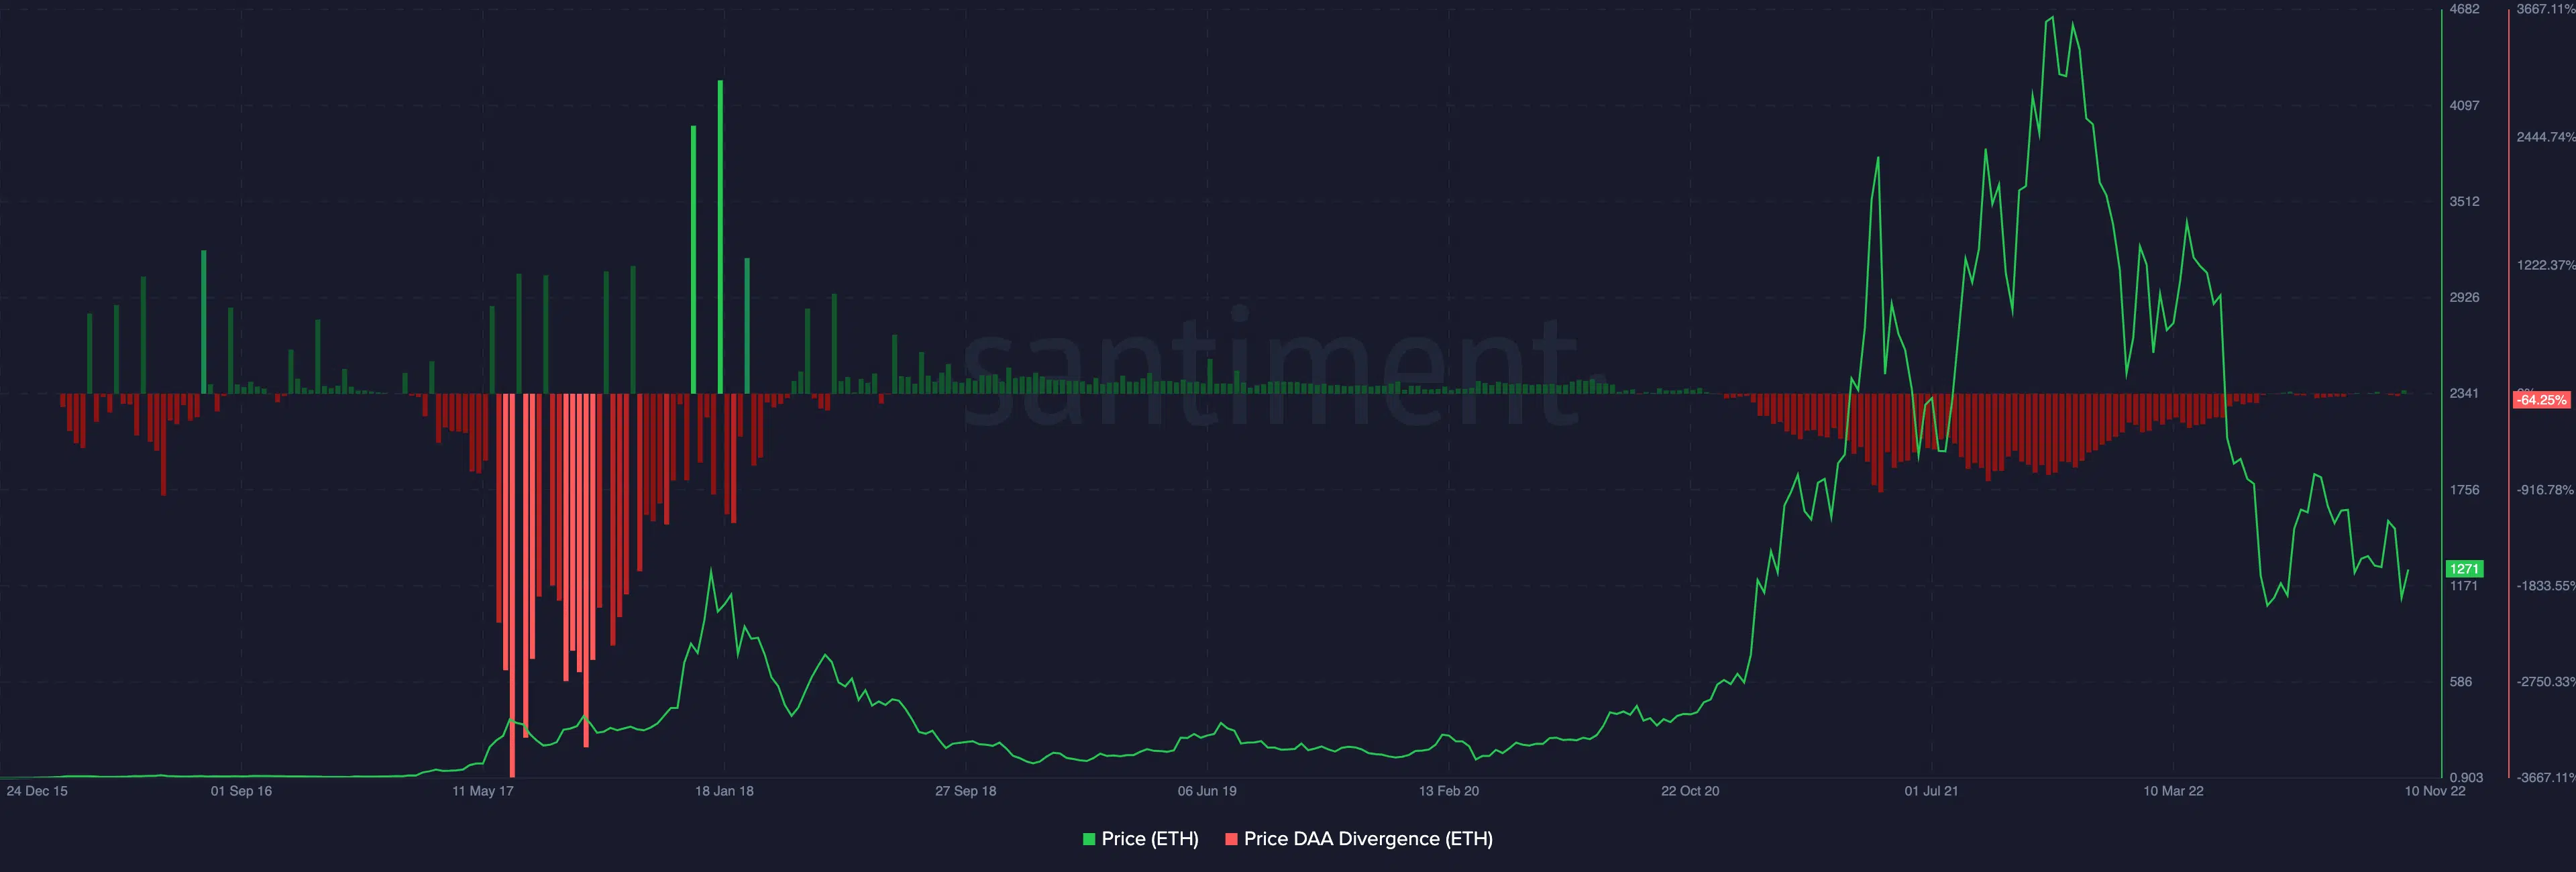 Ethereum price and daily active addresses data